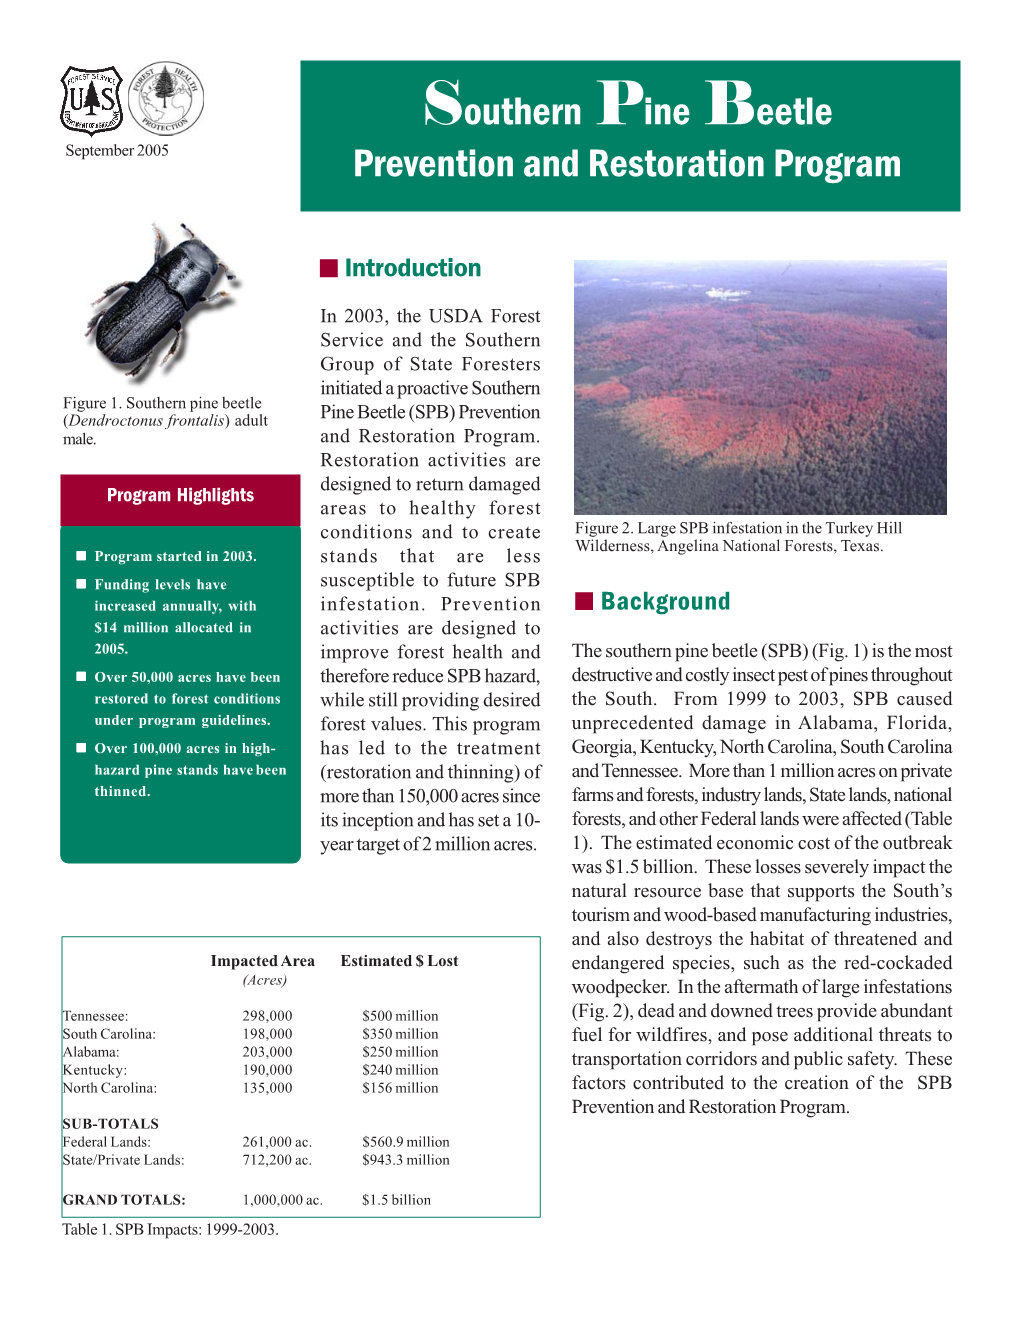 Southern Pine Beetle Prevention and Restoration Program3